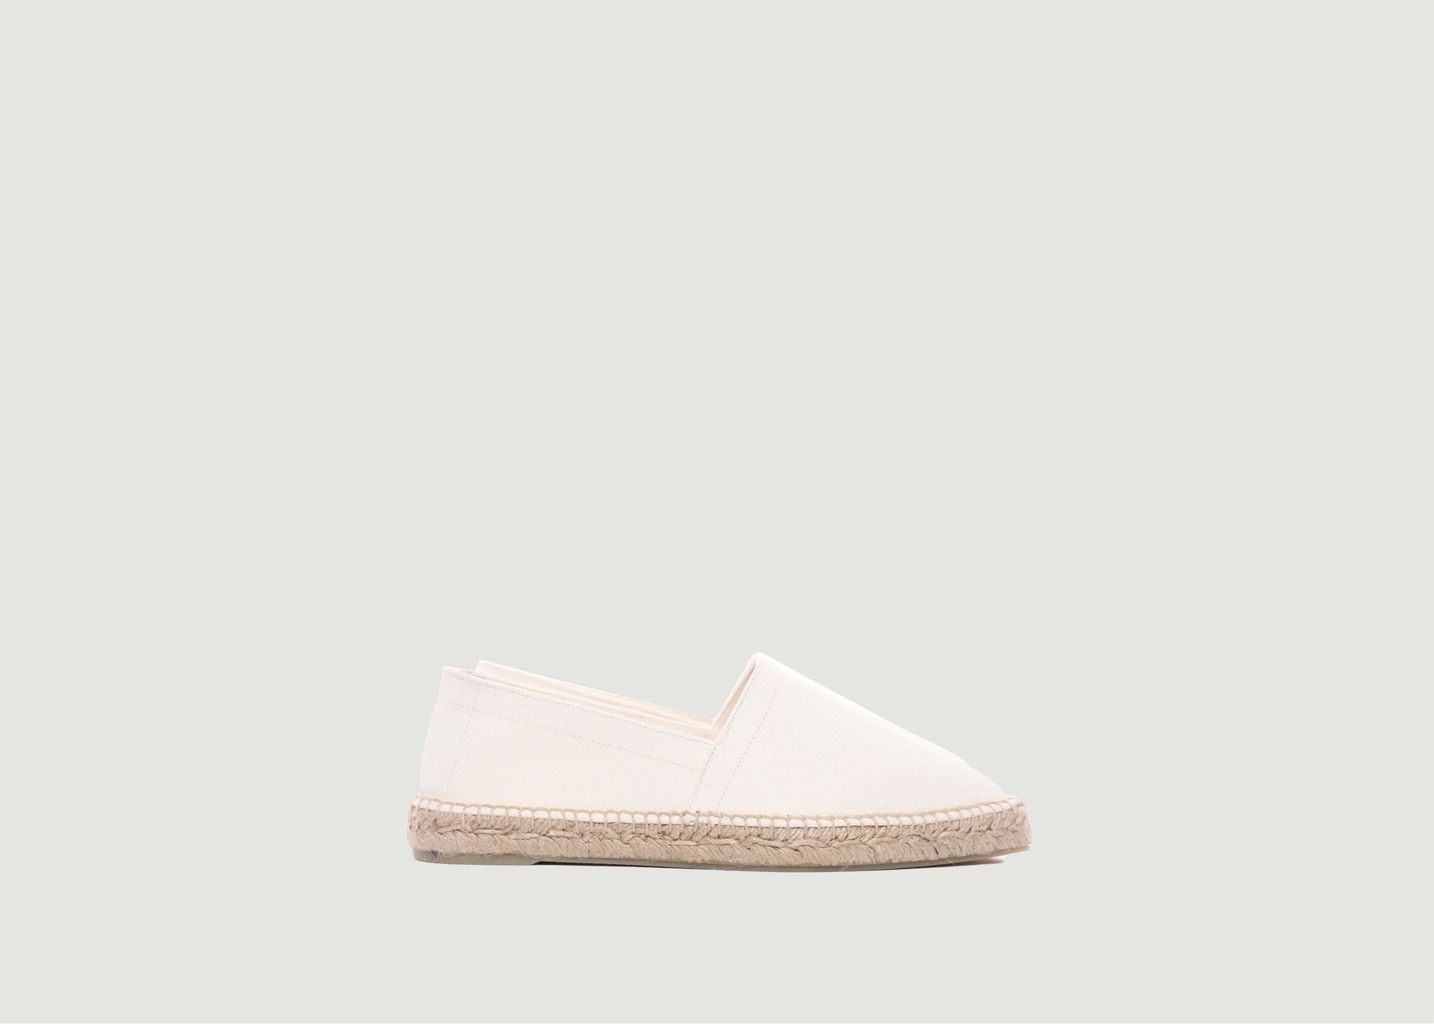 Espadrille Anaia in recycled materials - pare gabia